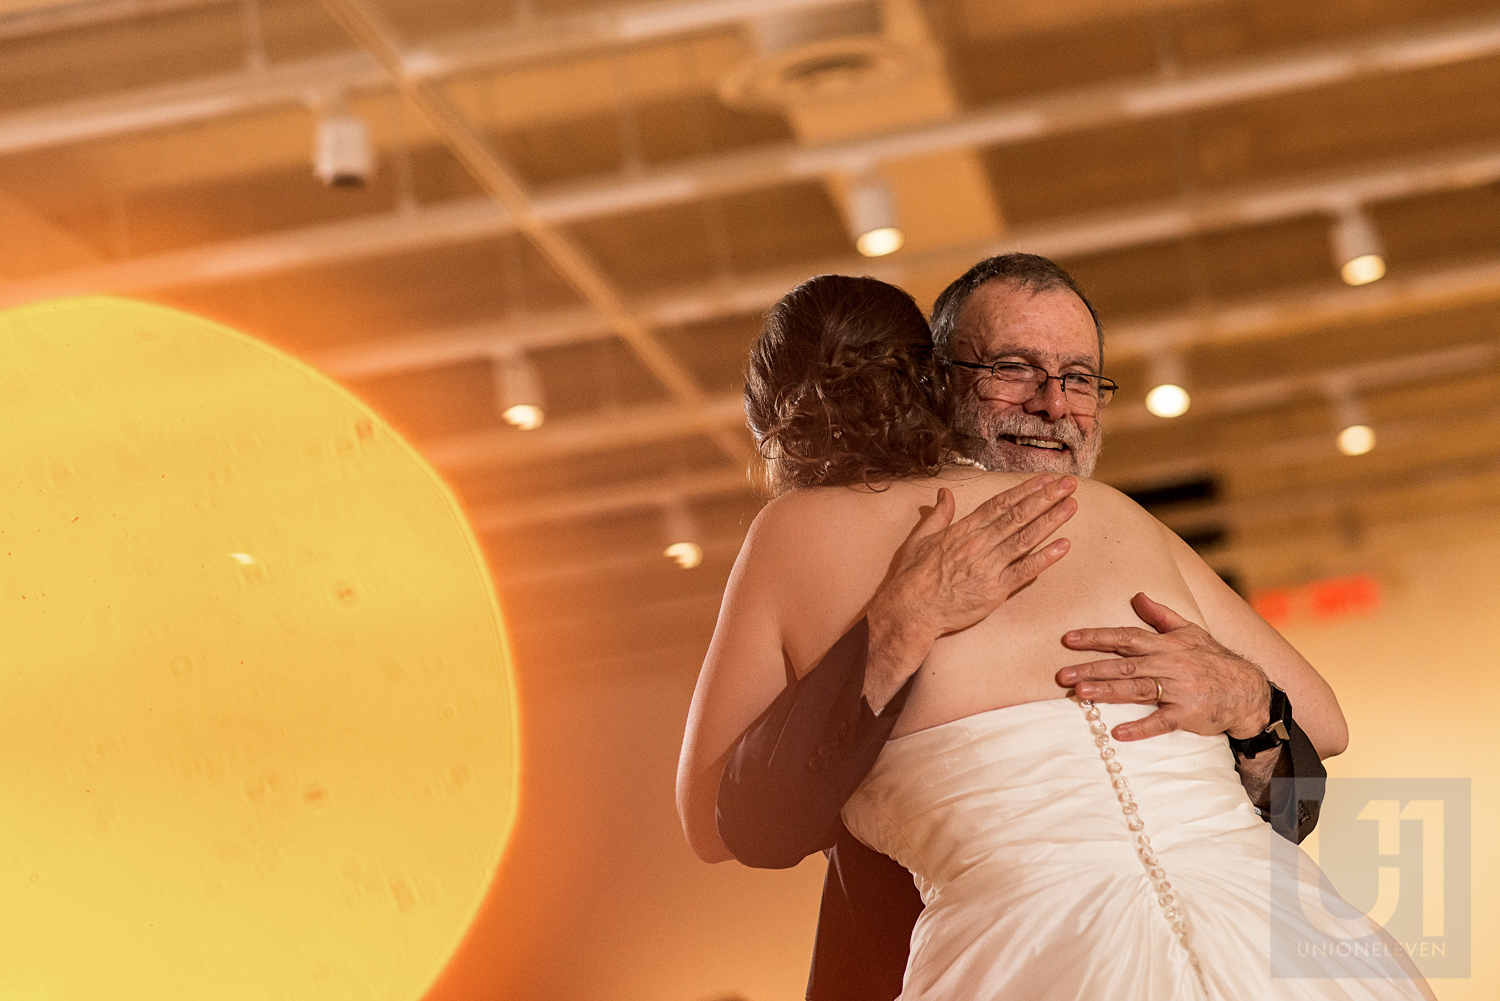 A photo of a hug between the bride and her father at the wedding reception